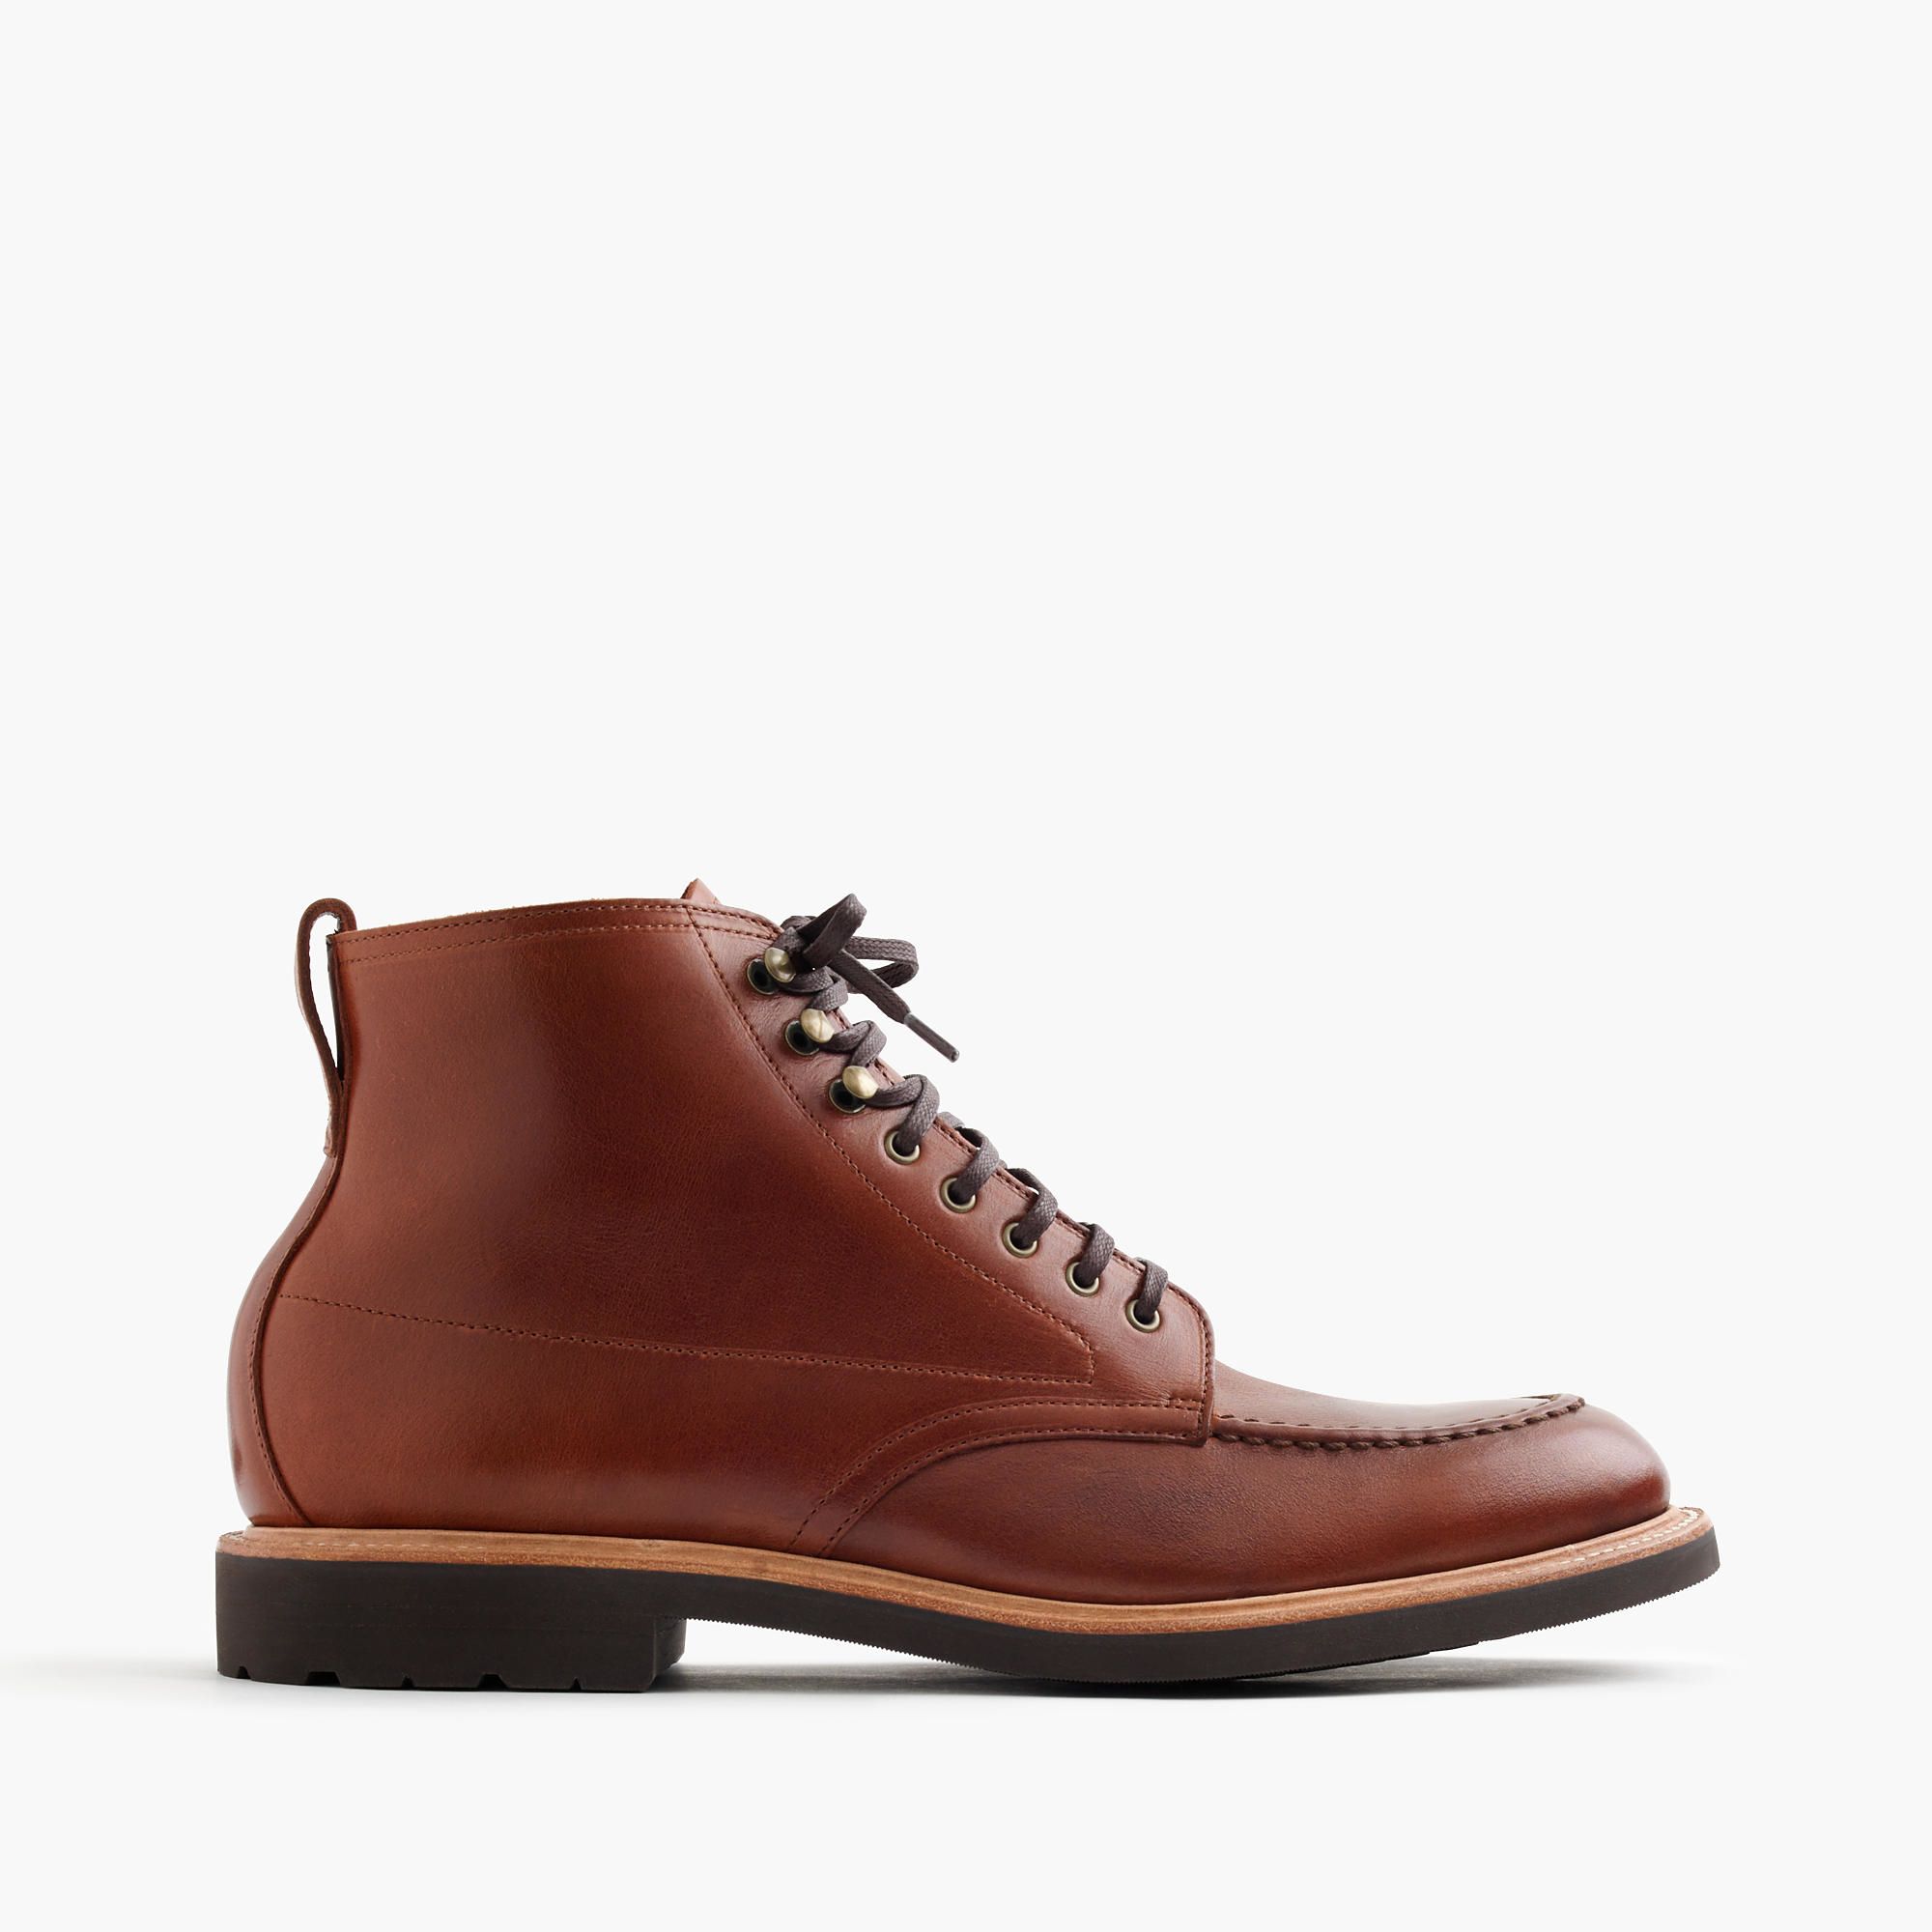 J.crew Kenton Leather Pacer Boots for Men Lyst